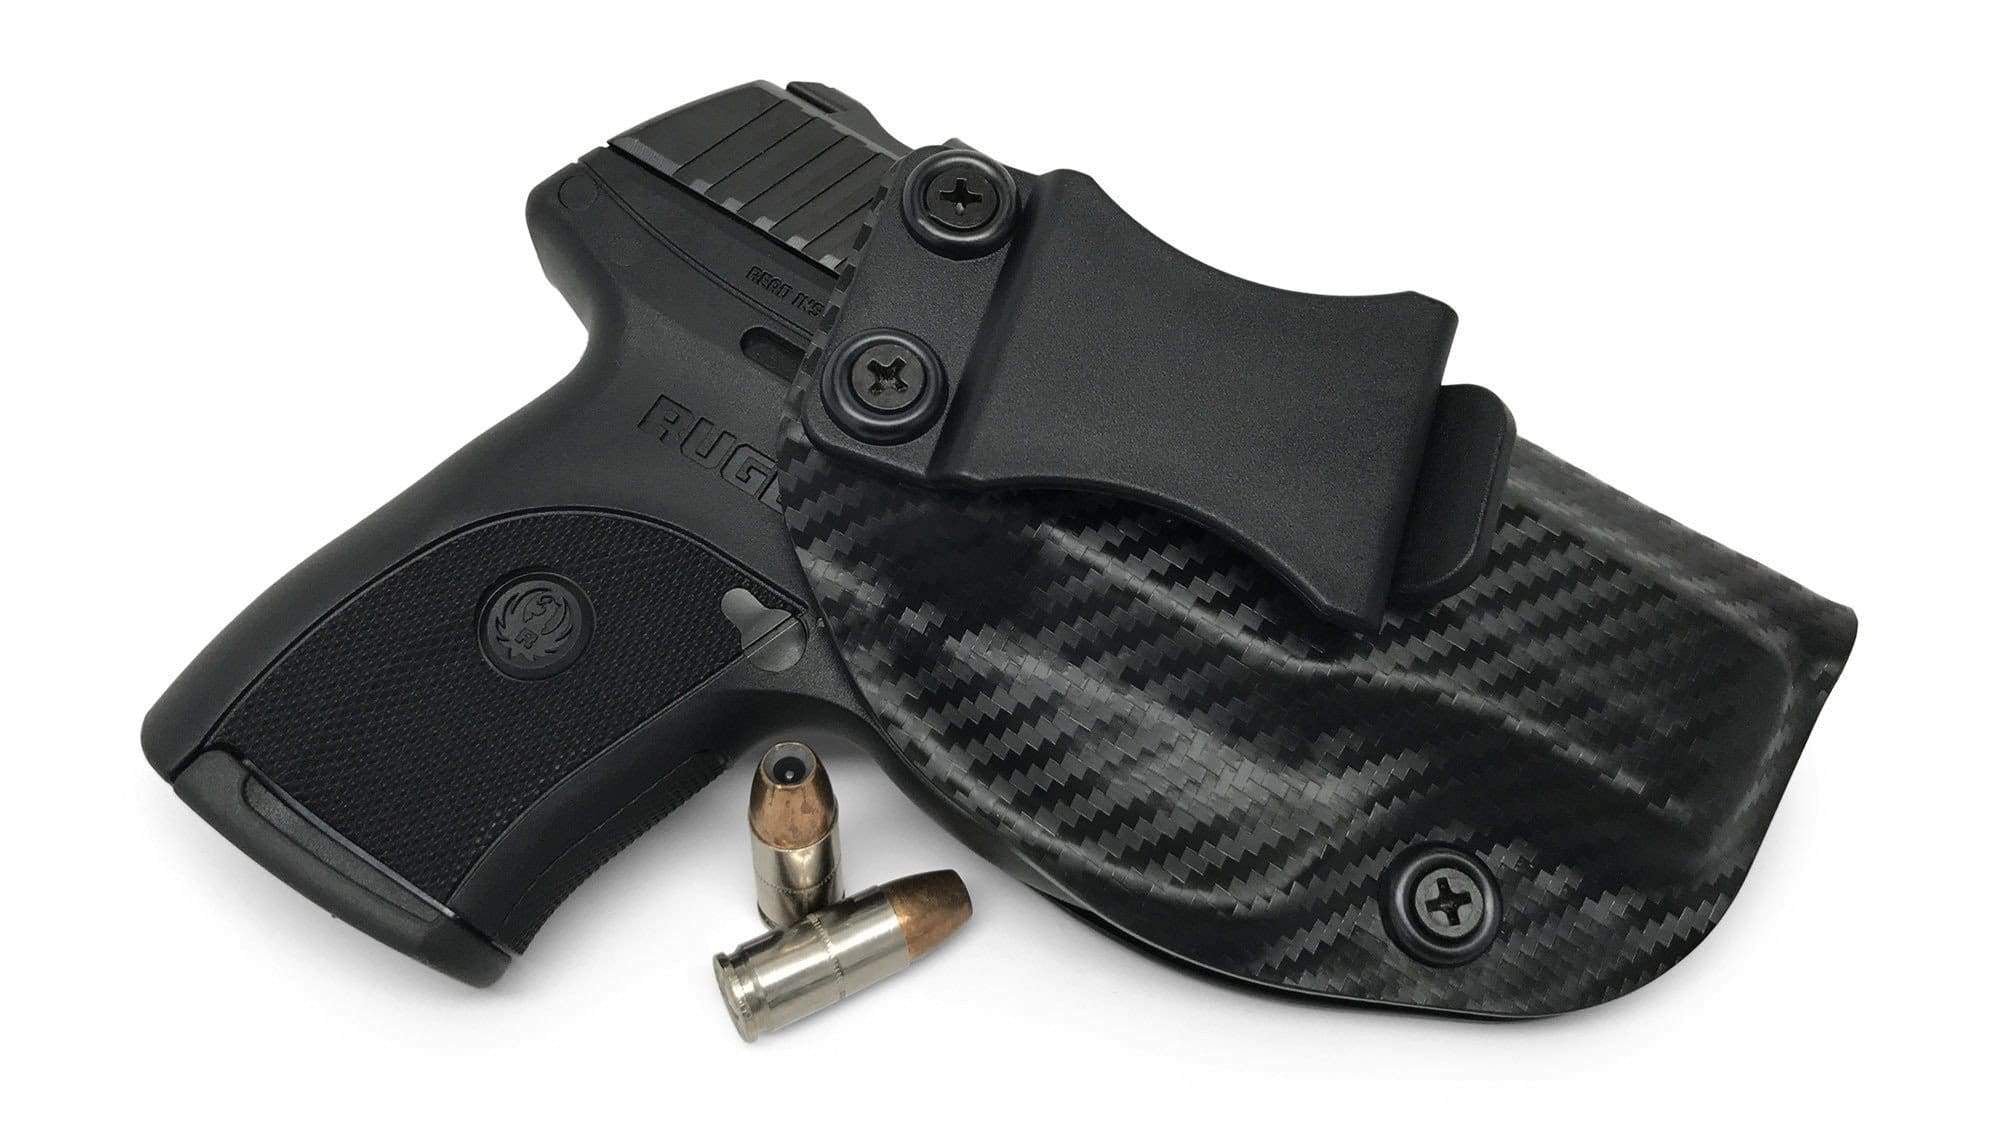 Talon ruger lcp wallet holster.